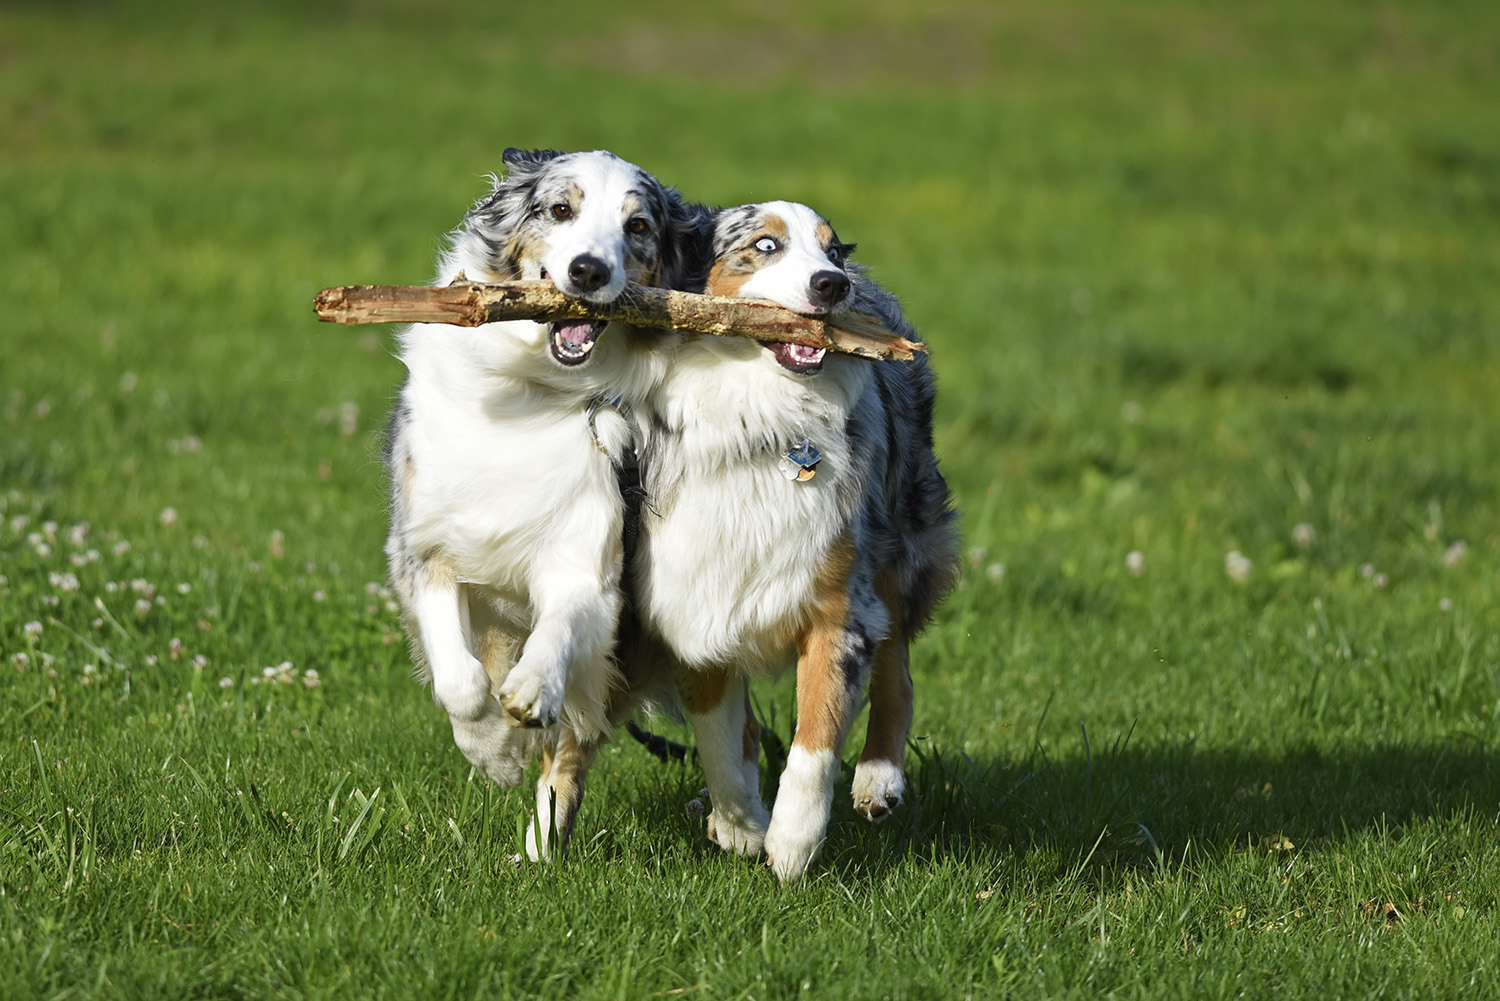 Australian_Shepherds_Play_Outdoor_Meadow_Running_Together_Tandem_Carrying_Stick.jpg